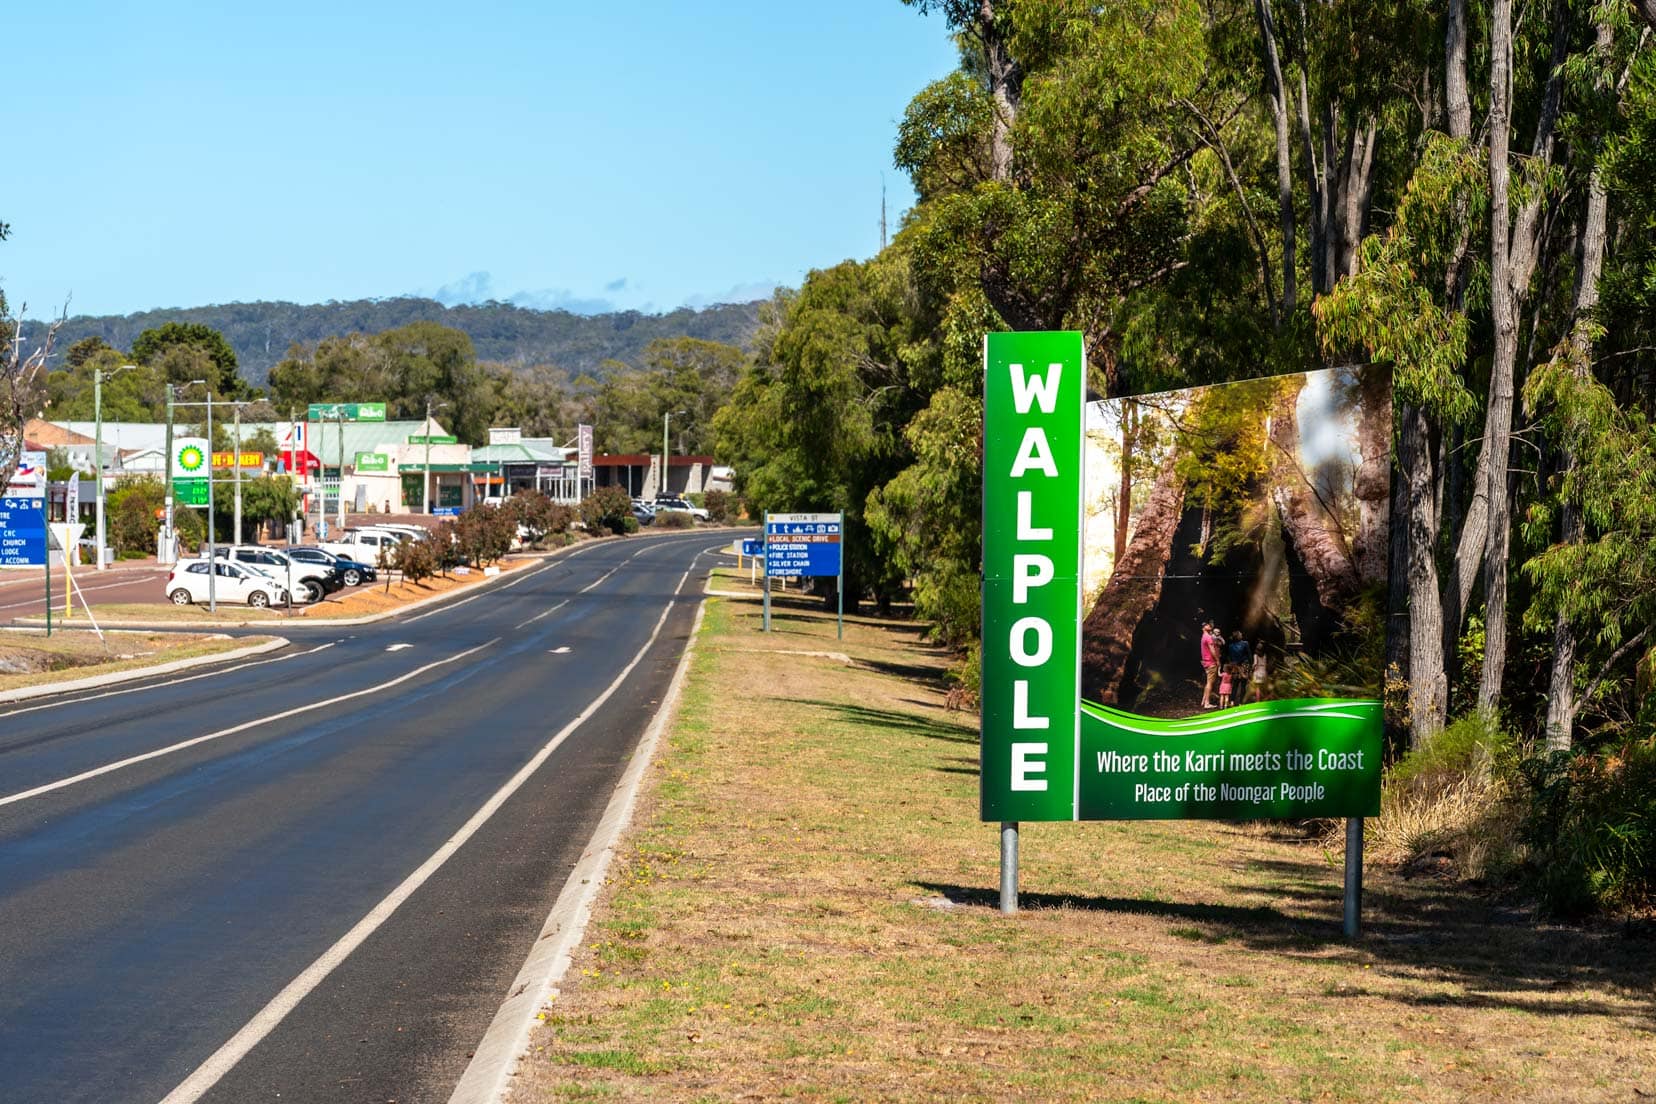 Walpole town with a large sign with Walpole in large letters 